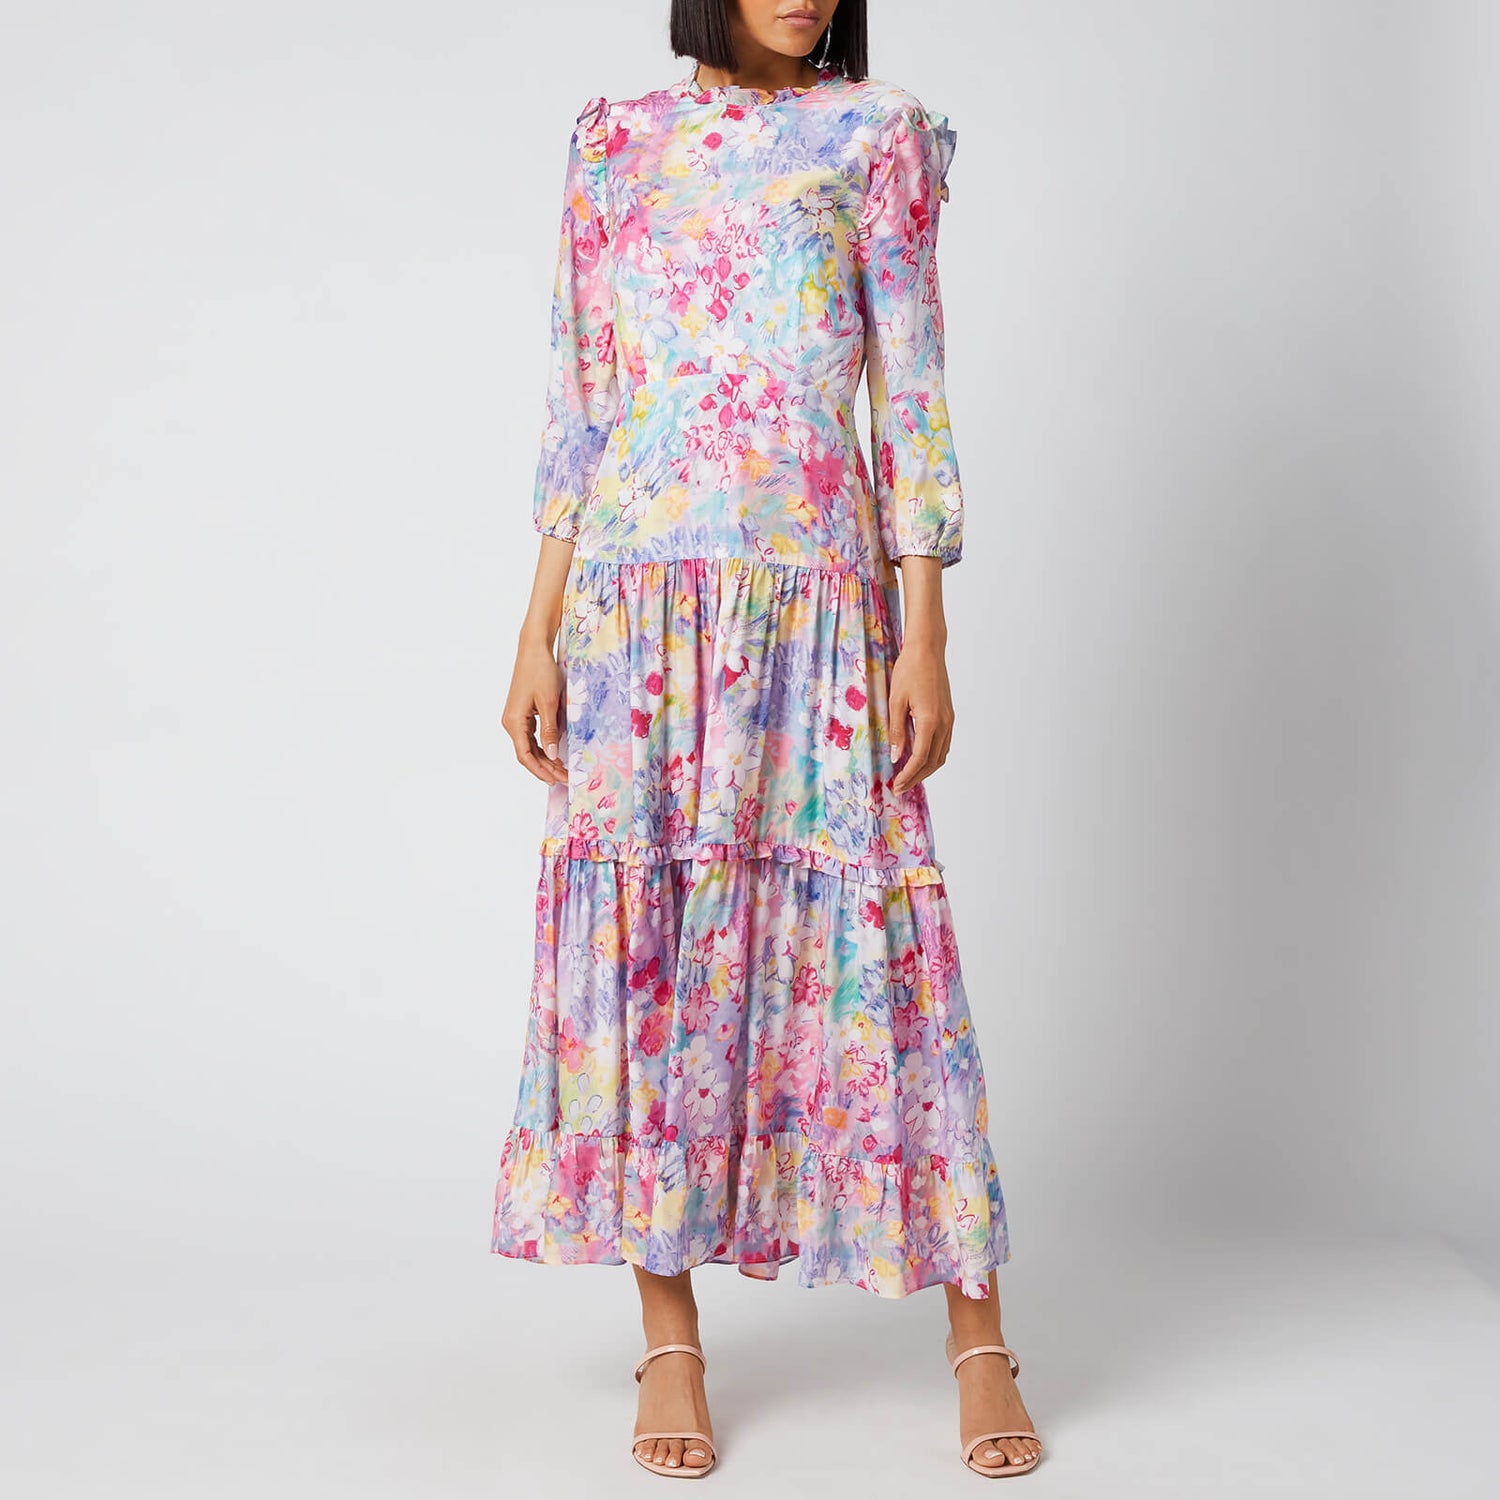 RIXO Women's Monet Dress - Spring Meadow - Free UK Delivery Available